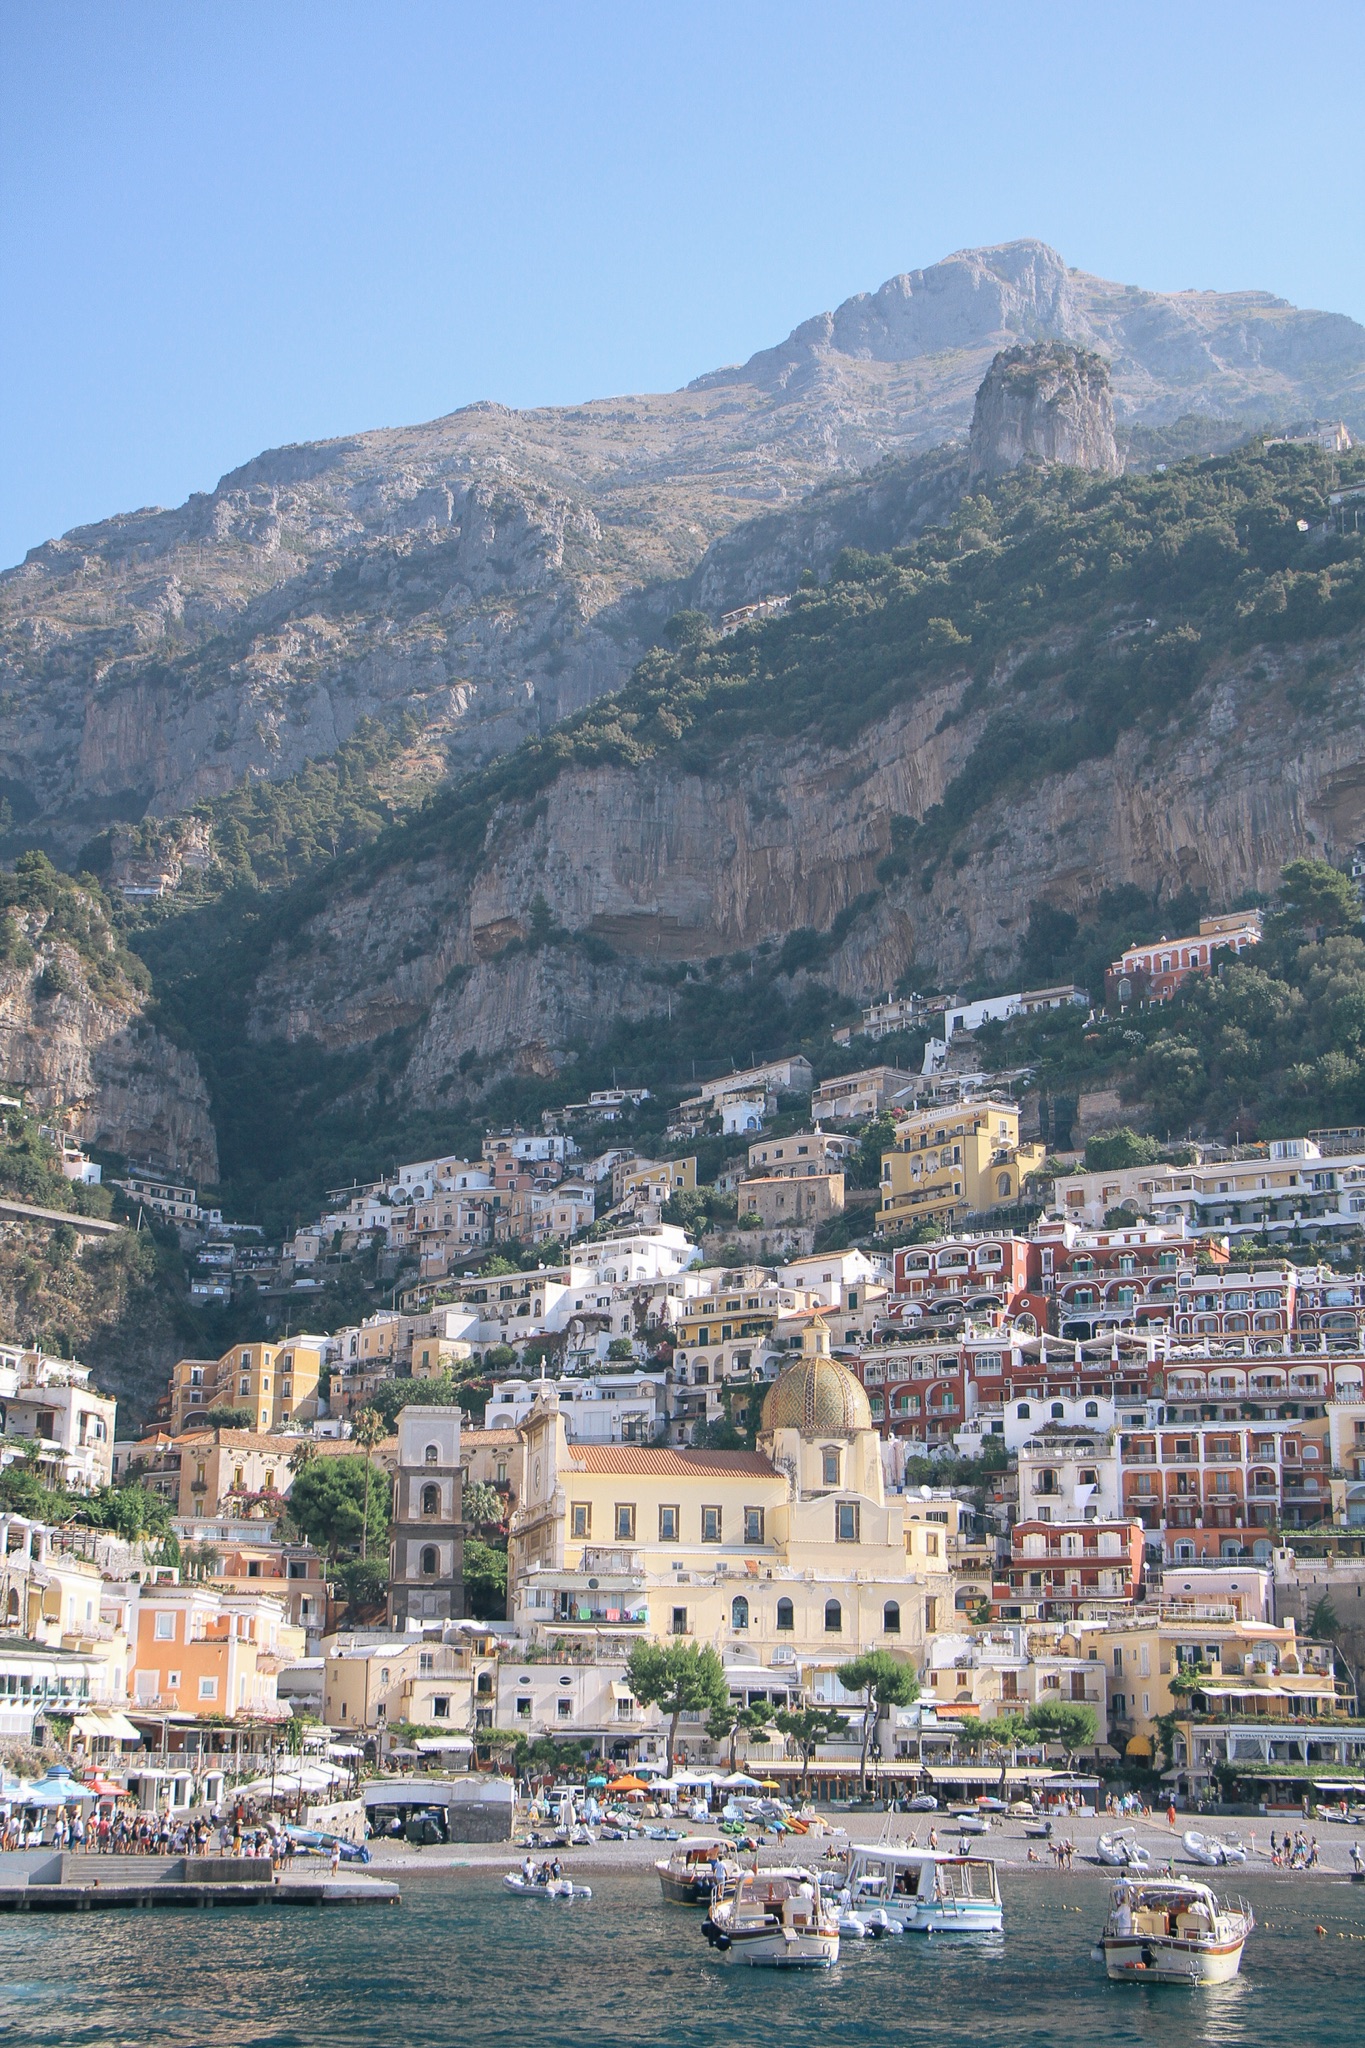 My Complete Guide to the Best of Positano, Italy